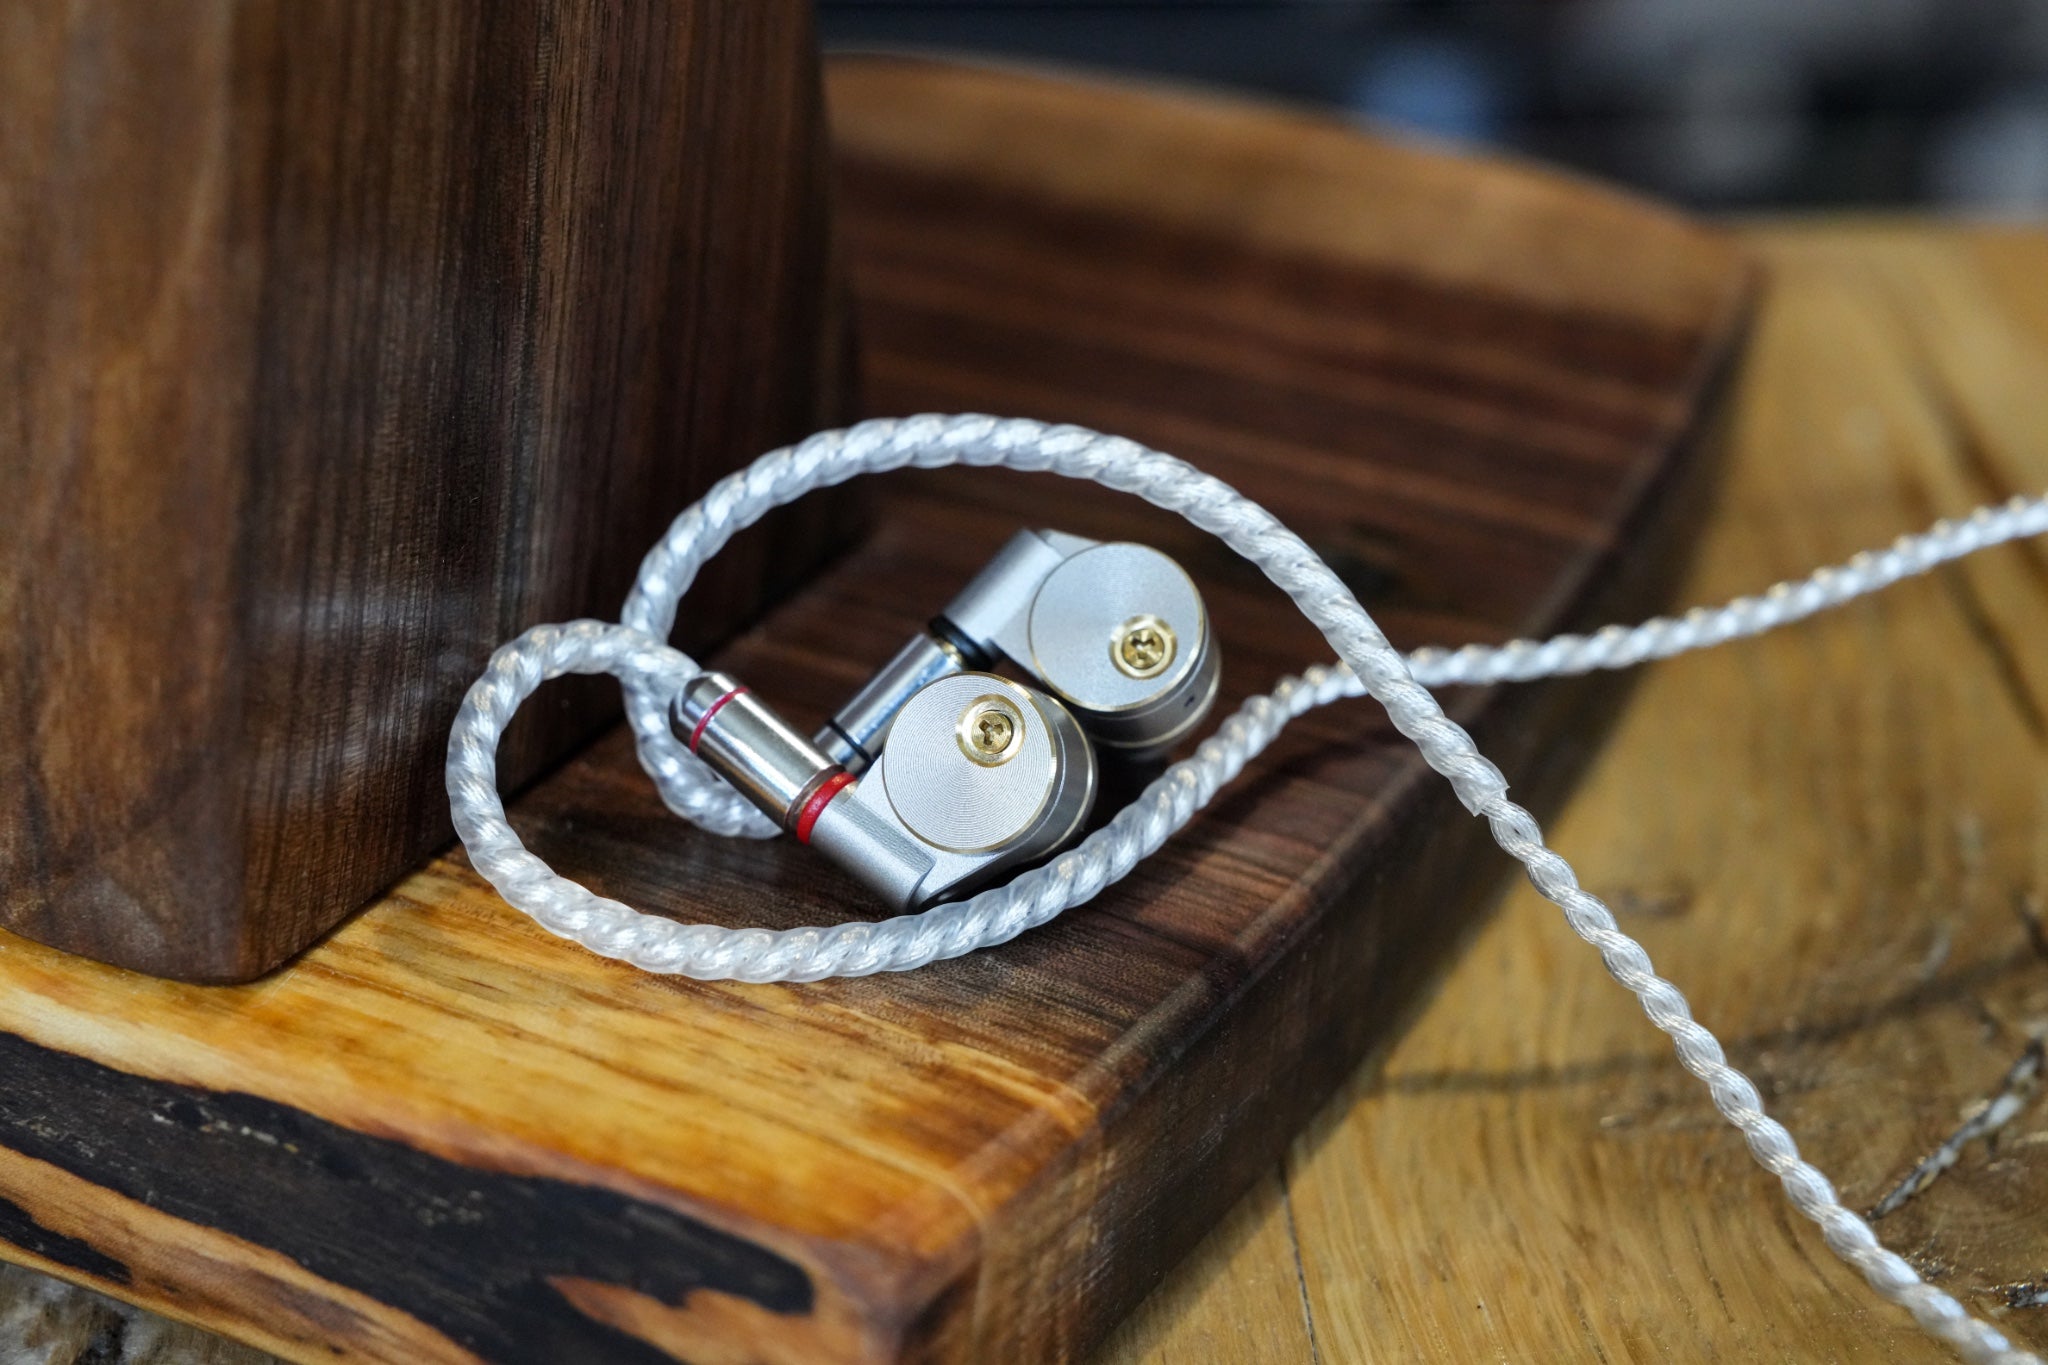 Ucotech RE-2 earphones on wood stand and table from Bloom gallery